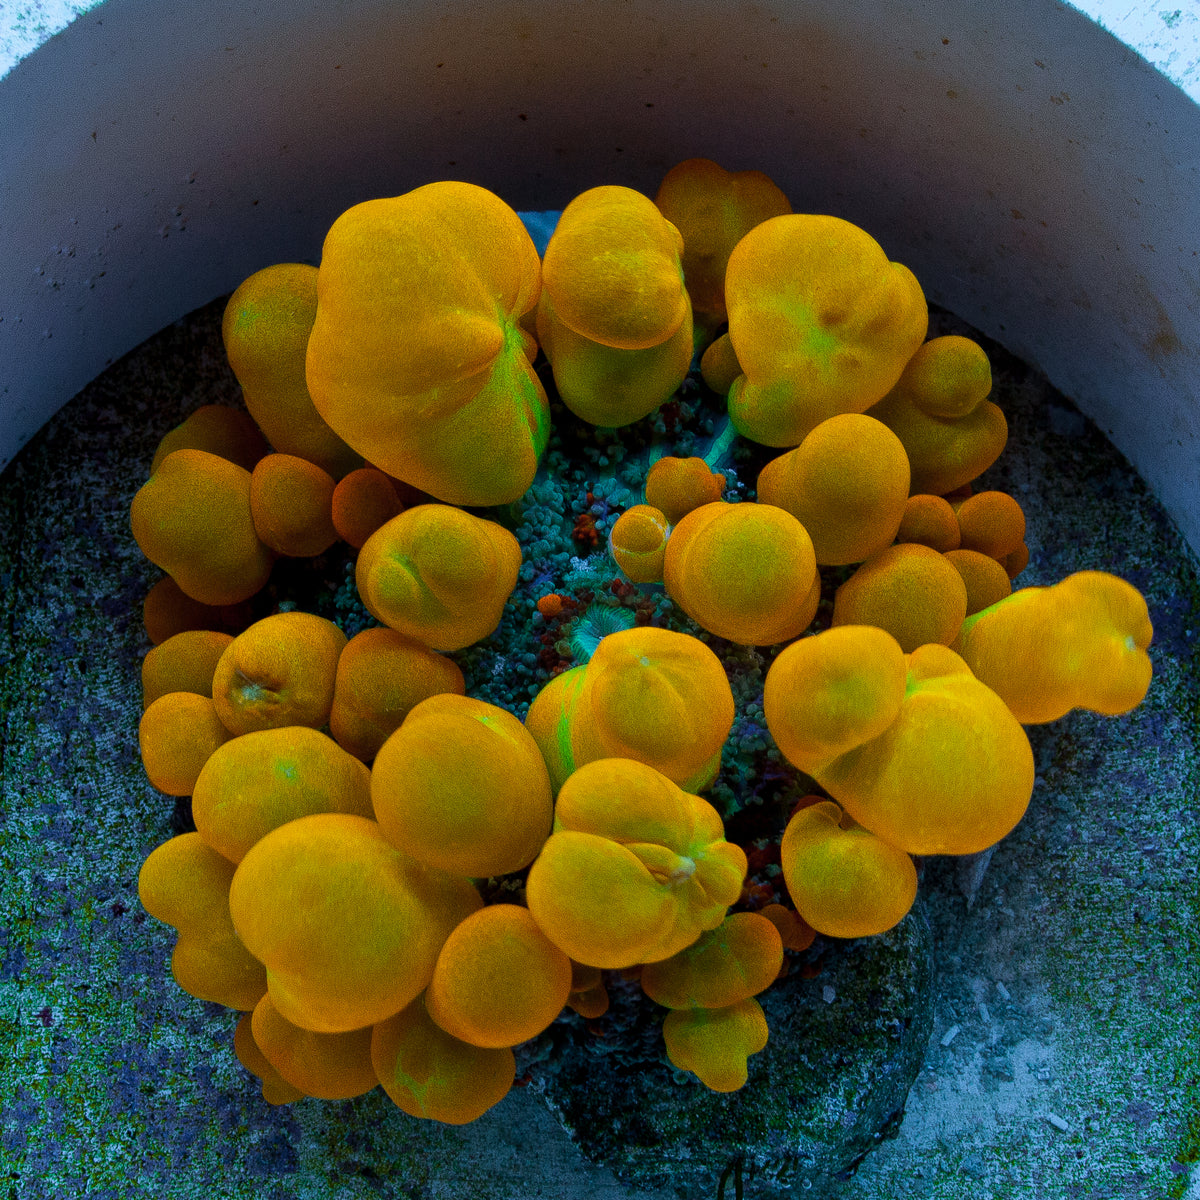 Candy crush mushroom colony live wysiwyg corals for sale online